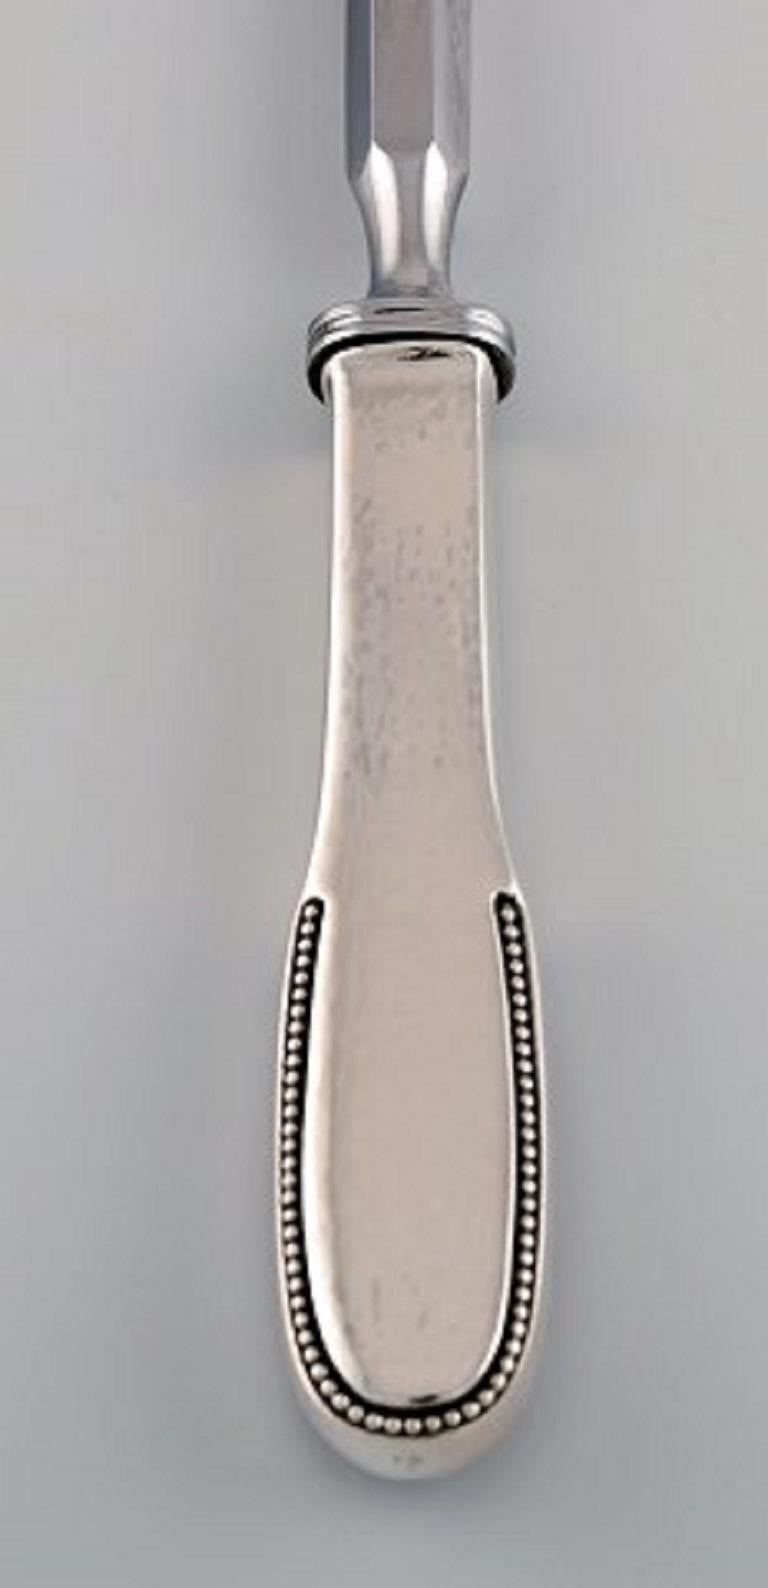 Rare Evald Nielsen number 14 sharpening steel in hammered silver and stainless steel. 1920s.
Length: 30.8 cm.
Stamped.
In excellent condition.
Our skilled Georg Jensen silversmith / jeweler can polish all silver and gold so that it appears as